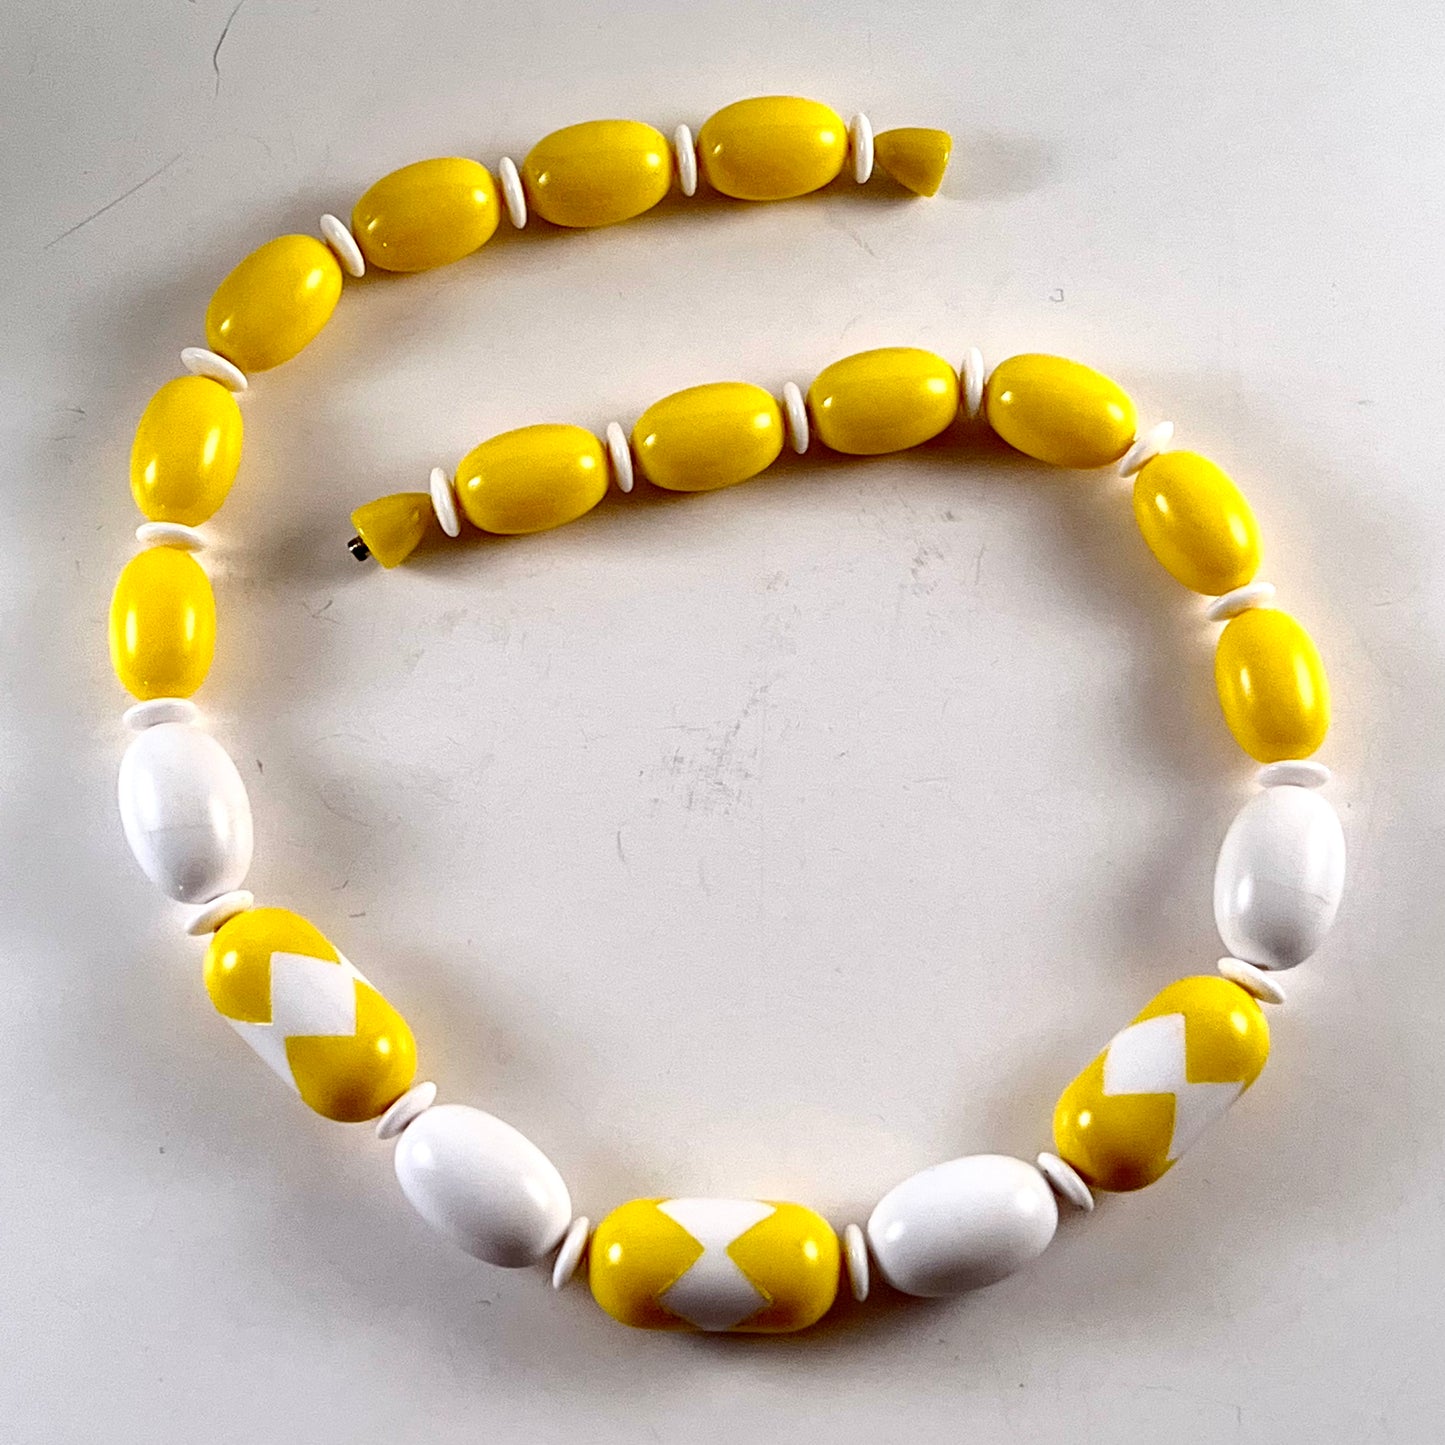 1987 Avon Sunsations Necklace & Earring Set in Spectator Yellow